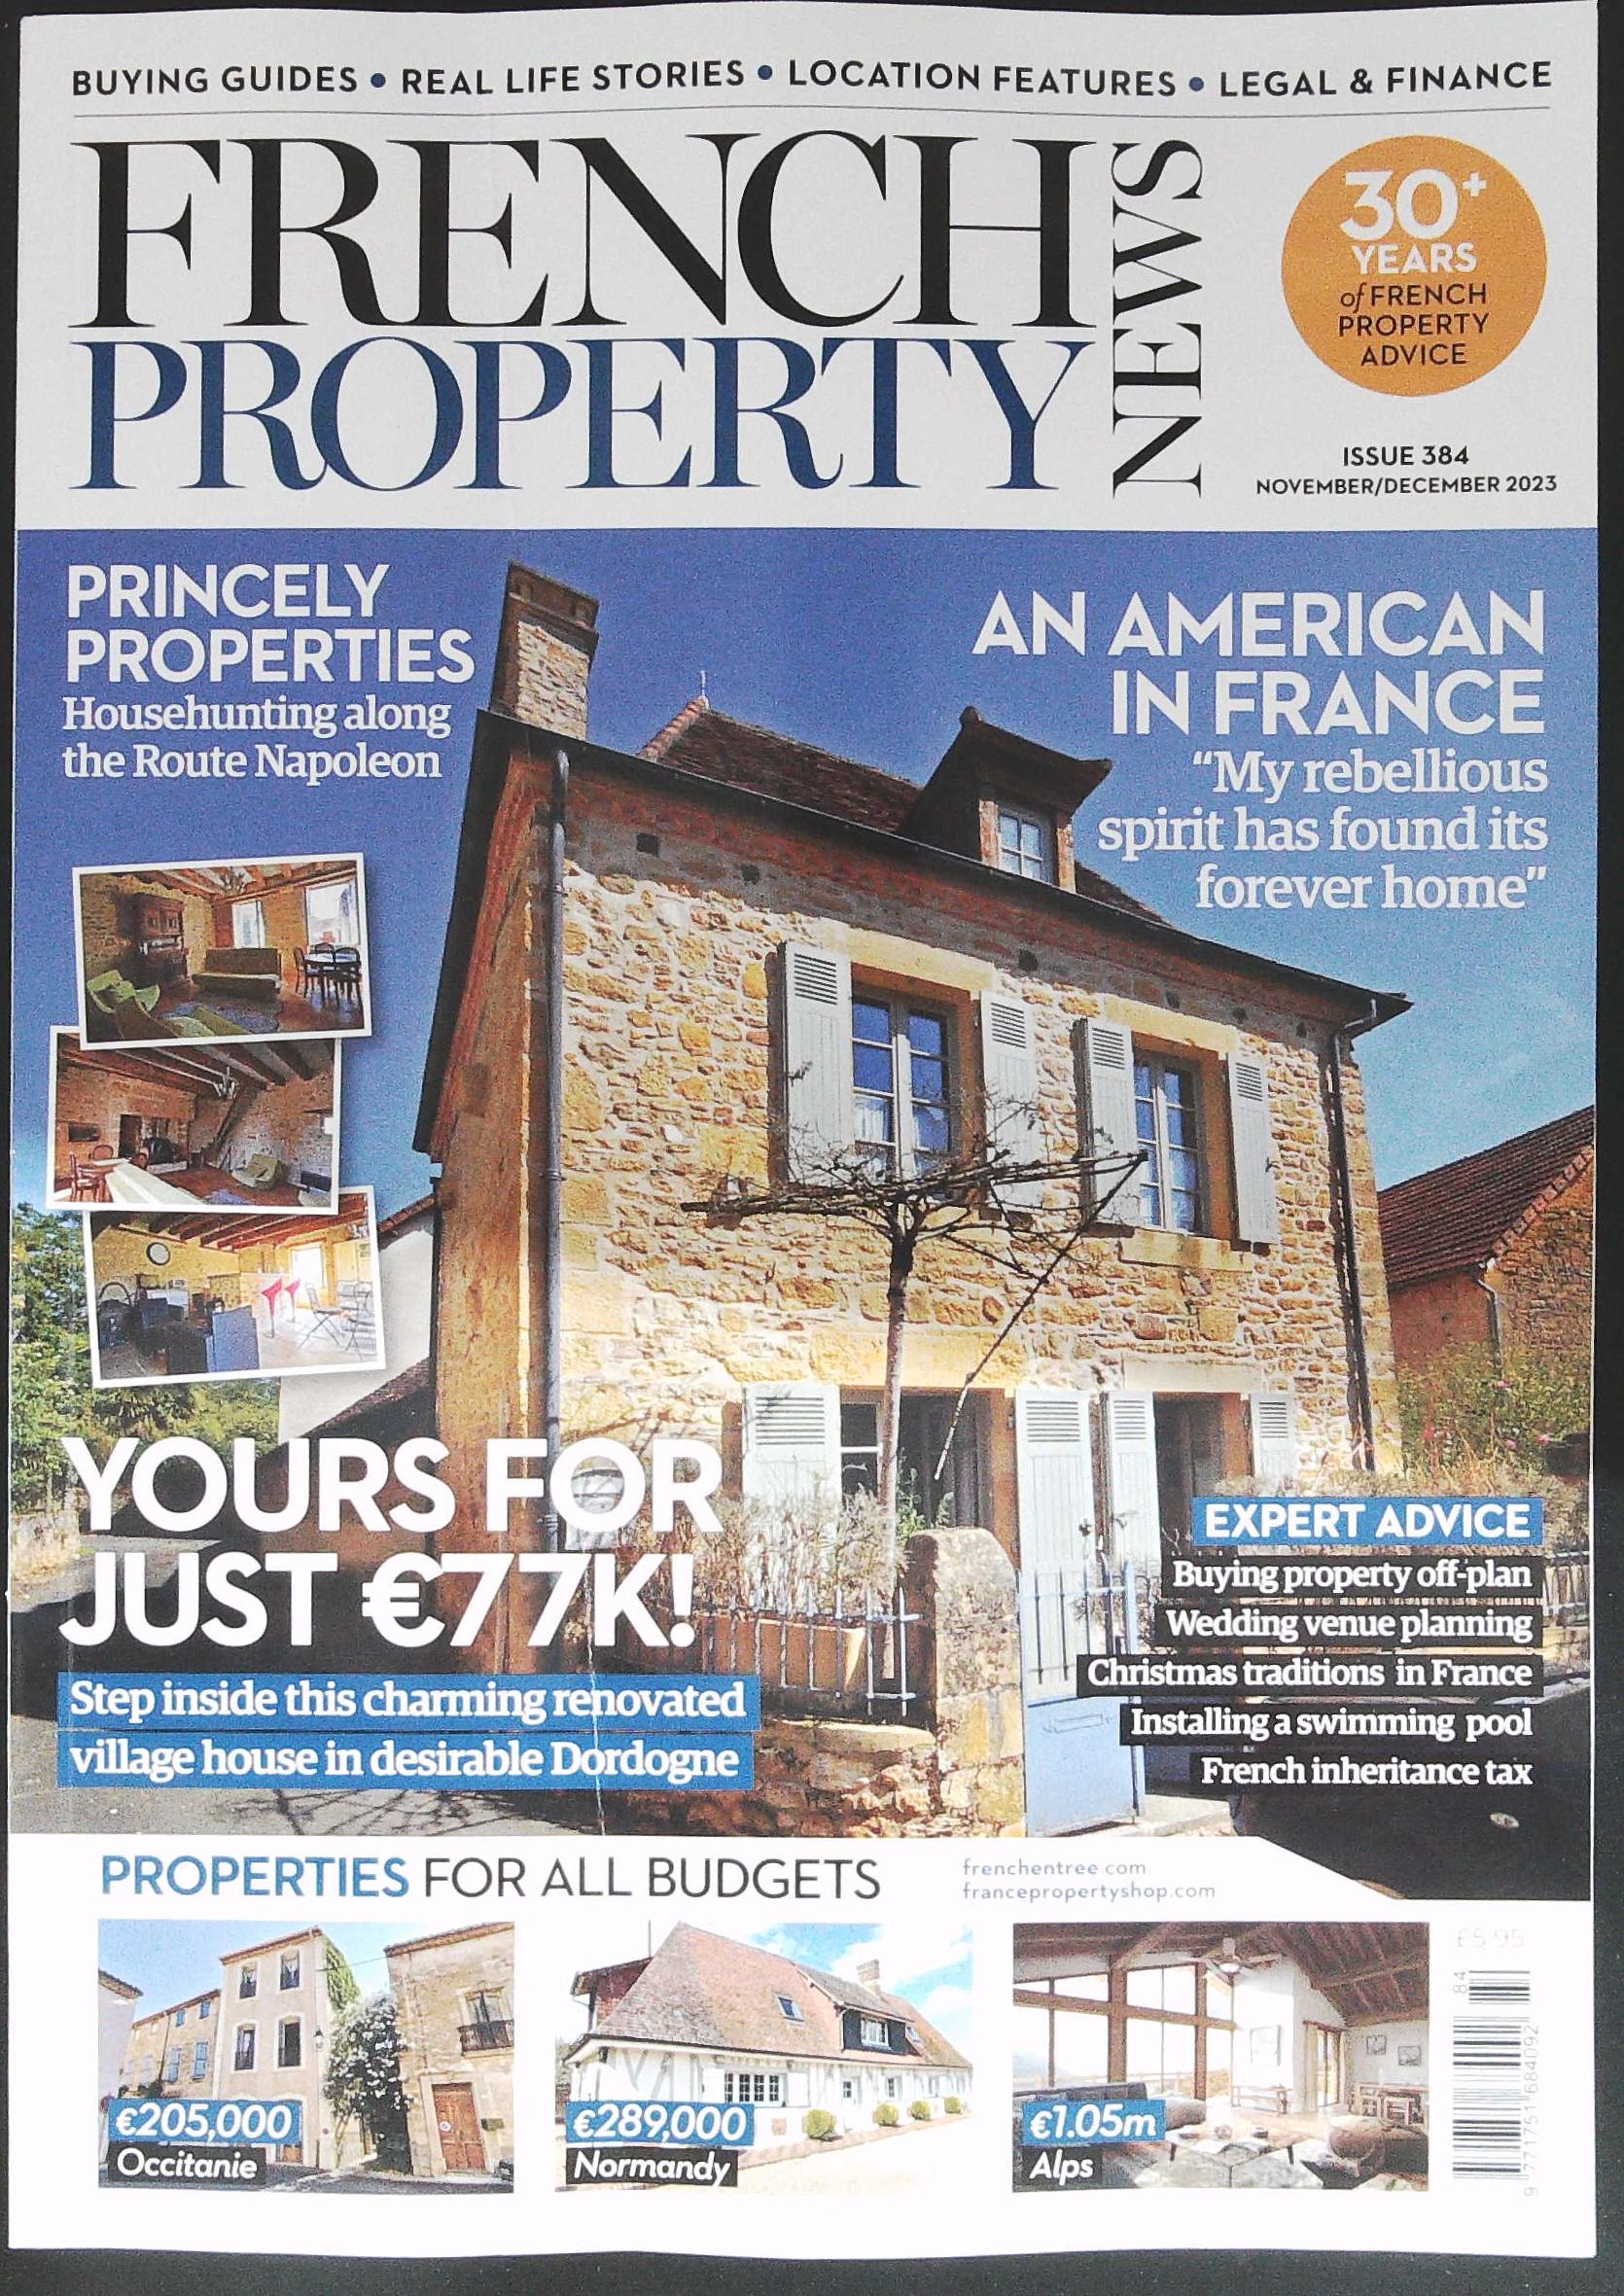 FRENCH PROPERTY NEWS